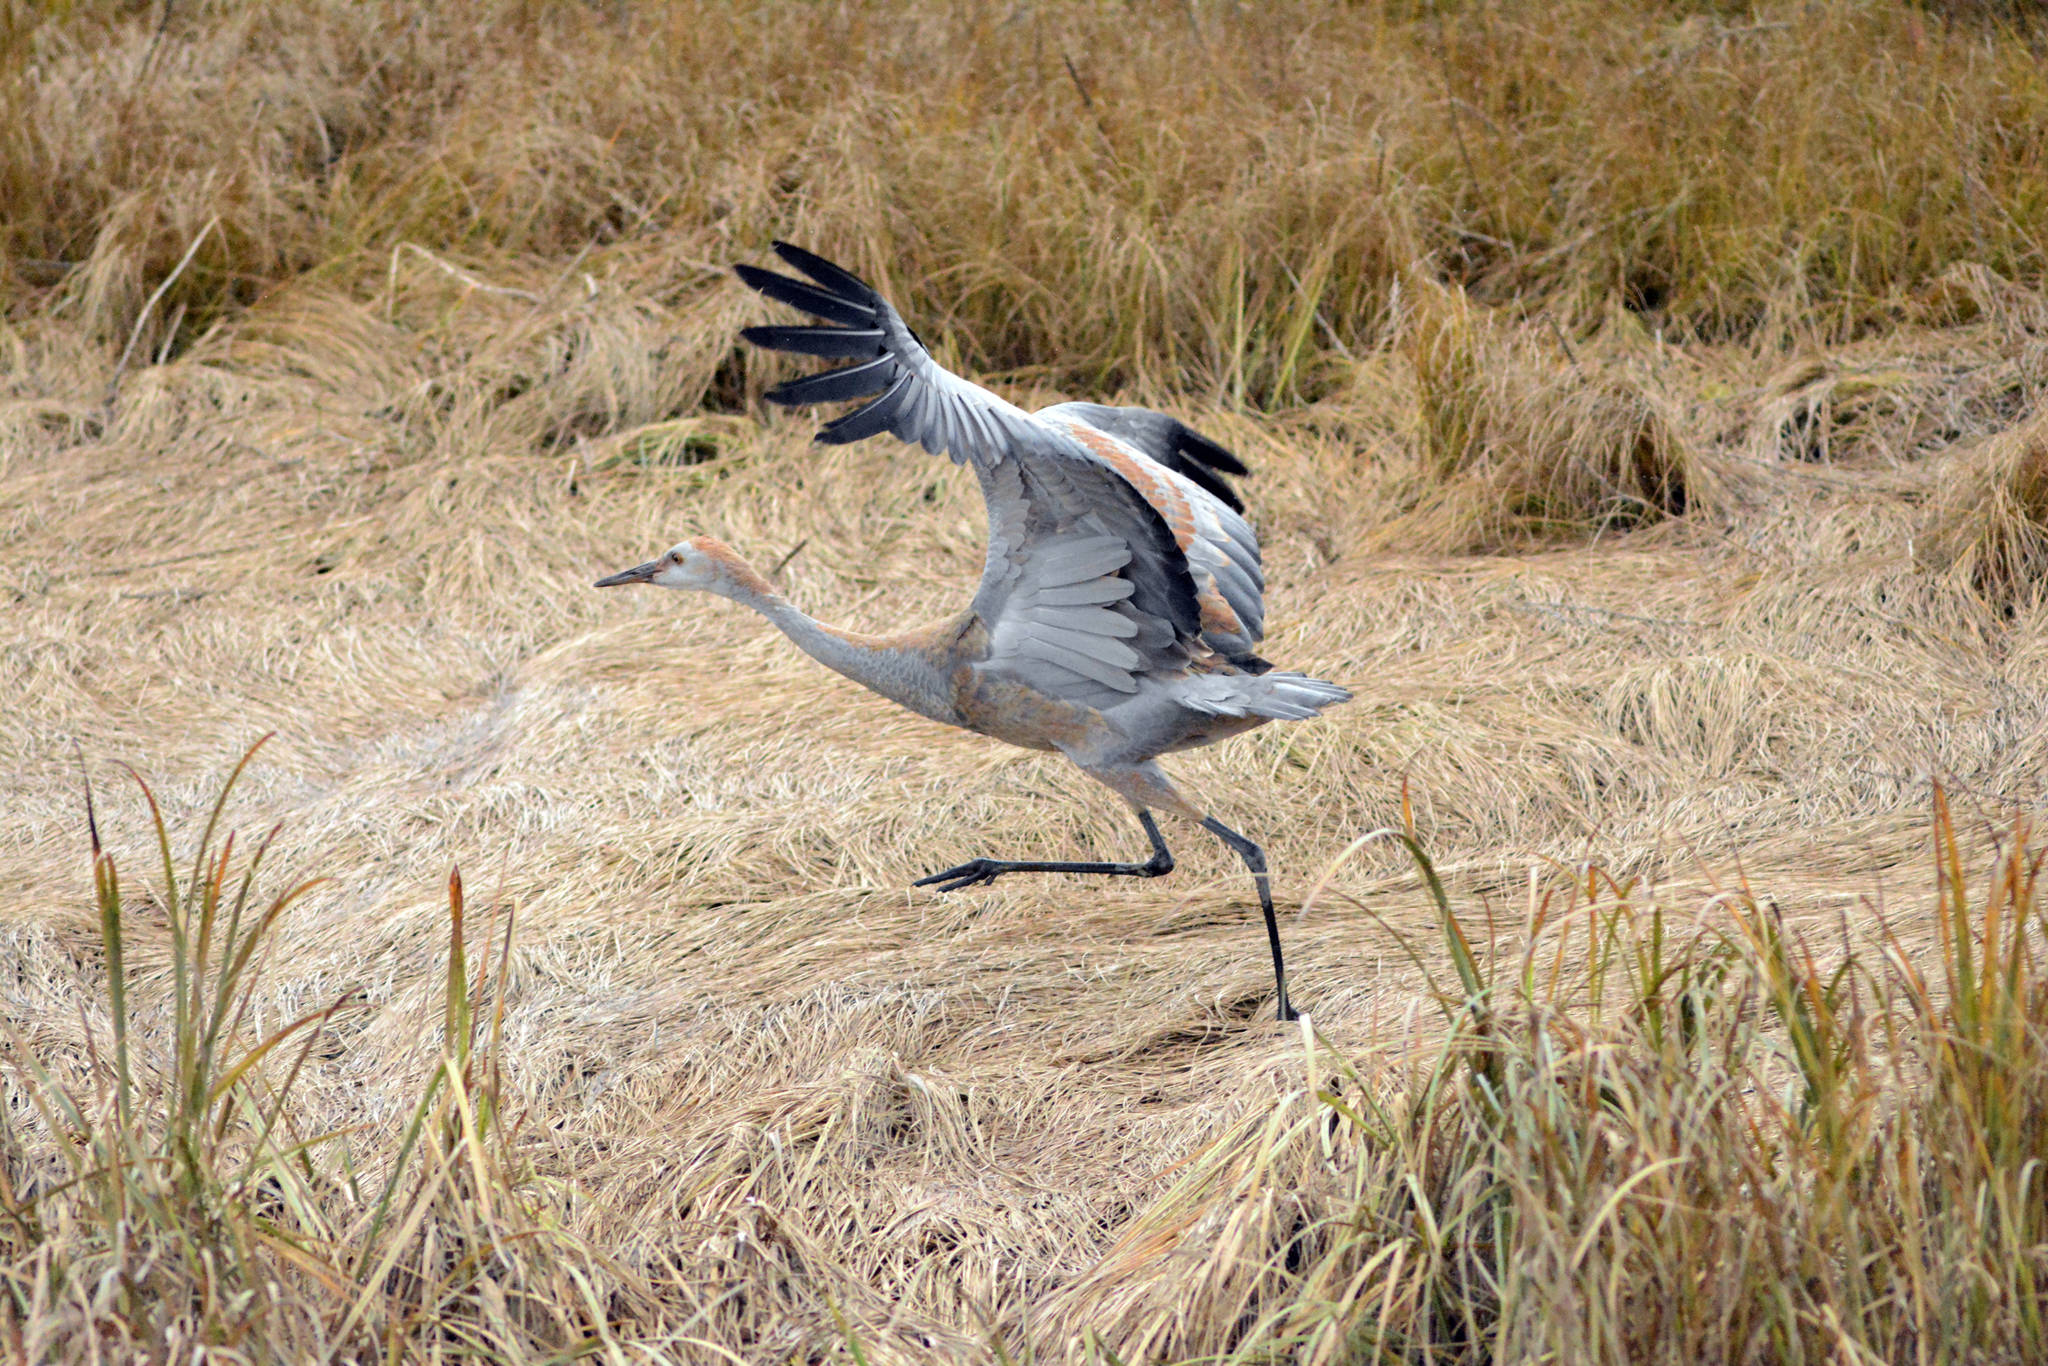 A sandhill crane colt attempts to fly at Beluga Slough last Thursday, Oct. 4, 2018, in Homer, Alaska. The young crane injured one wing and could only fly in short hops. David Lewis said he saw the colt hit a guardrail by the slough in late September. Its parents delayed their migration but eventually left on Oct. 6. On Monday, Oct. 8, volunteers with Kachemak Crane Watch rescued the injured colt and took it to Bird TLC in Anchorage, a bird rehabilitation center. (Photo by Michael Armstrong/Homer News)